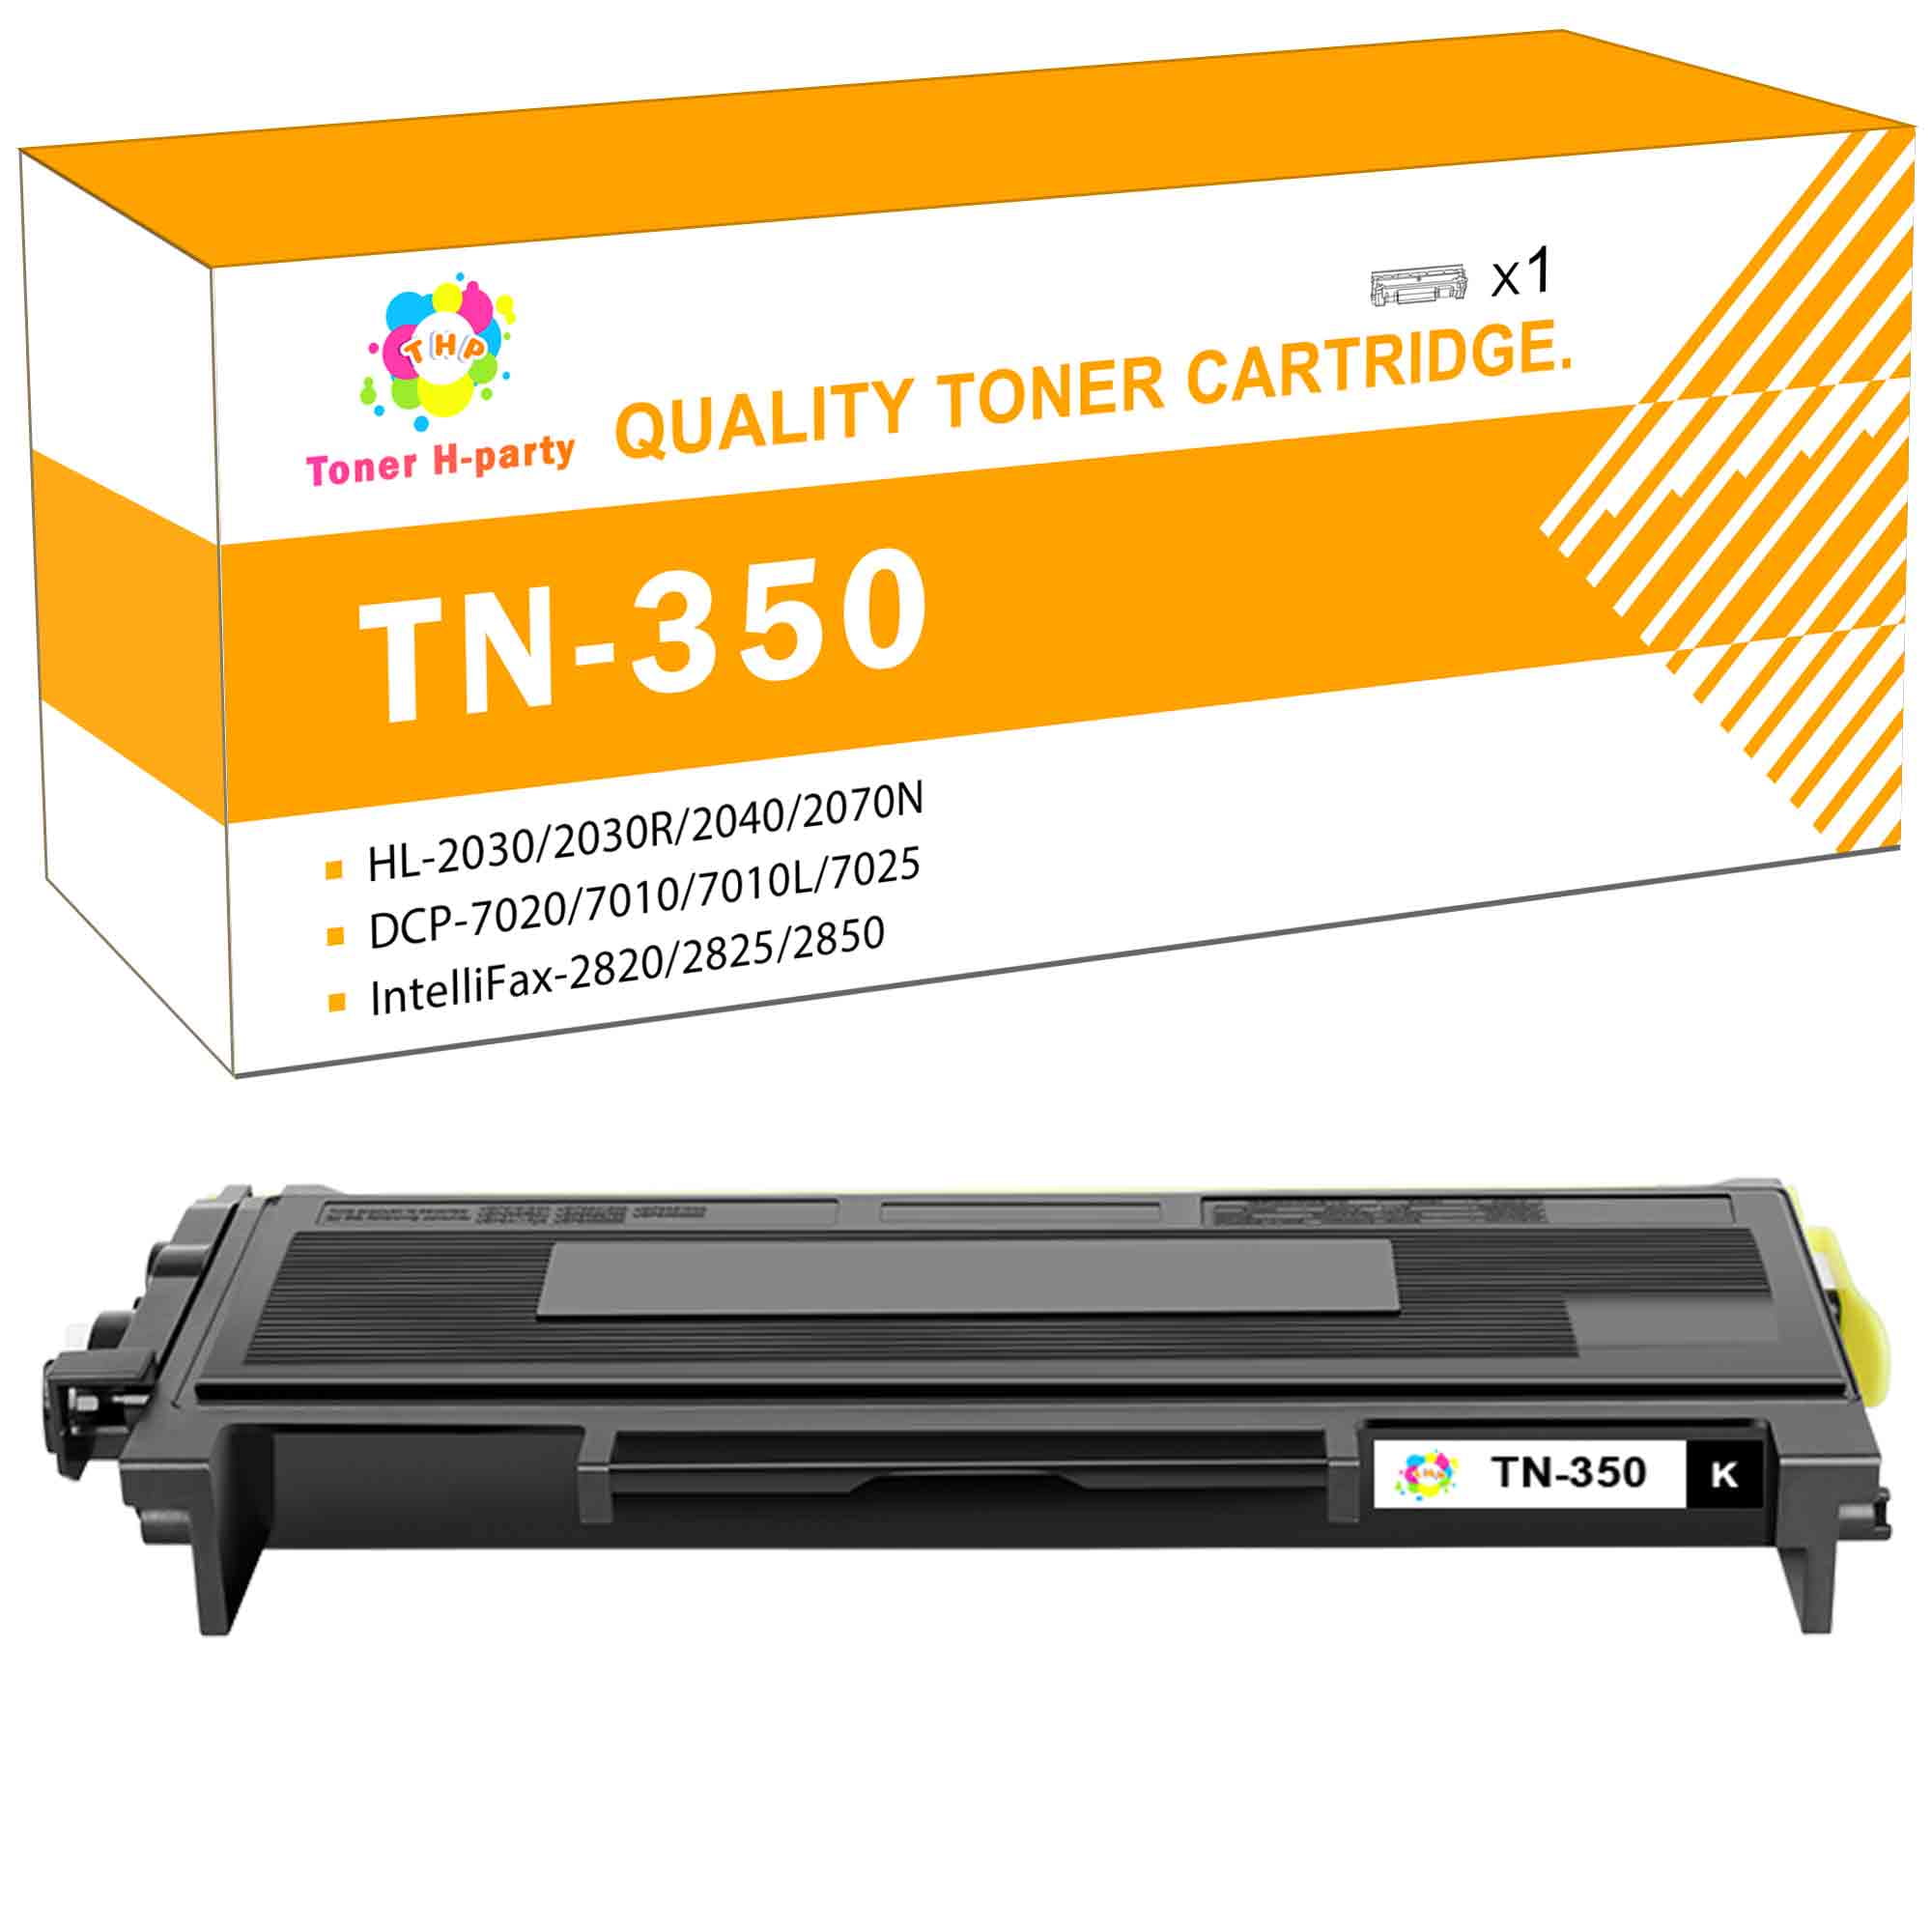 Toner H-Party Toner Cartridge Replacement for Brother TN350 TN-350 HL-2030 2040 2070 2035 2037 2037E MFC-7220 7820N DCP-7010 7020 (Black, 1 Pack) - Walmart.com